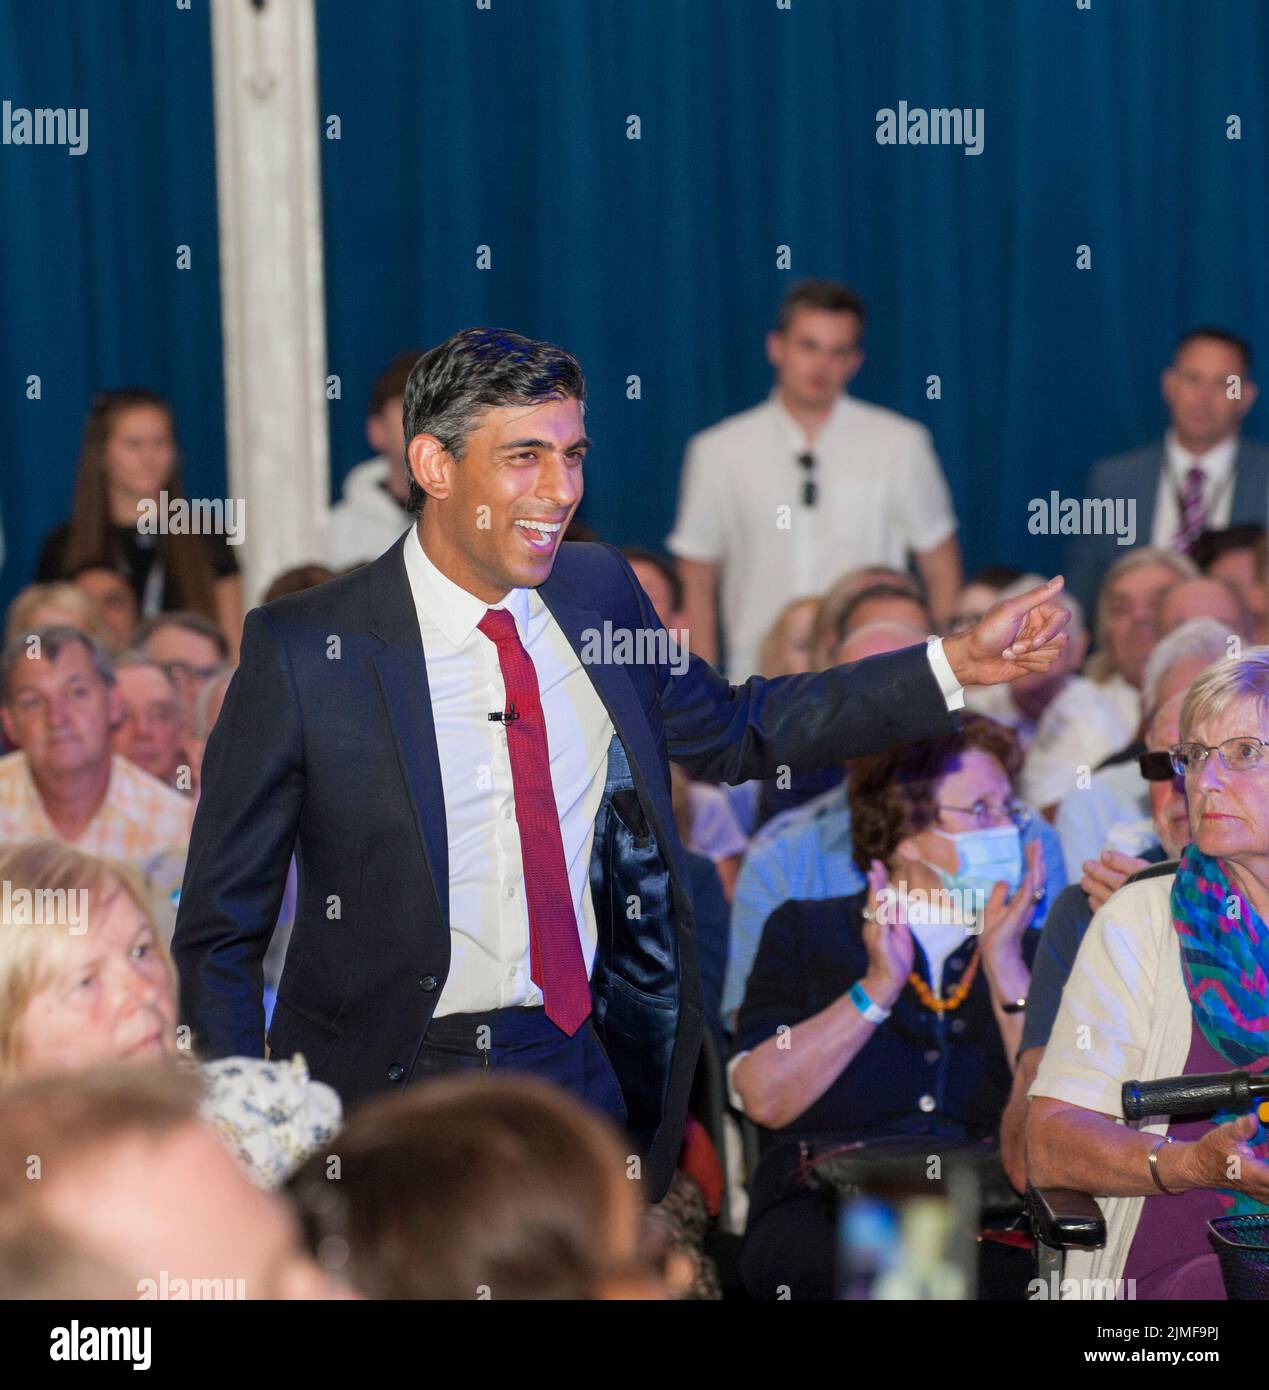 Rishi Sunak, former Conservative Chancellor, MP for Richmond (Yorks) in Eastbourne to face questions from Conservative party members. Part of cross country hustings campaigning to replace Boris Johnson as Party Leader and Prime Minister. Stock Photo